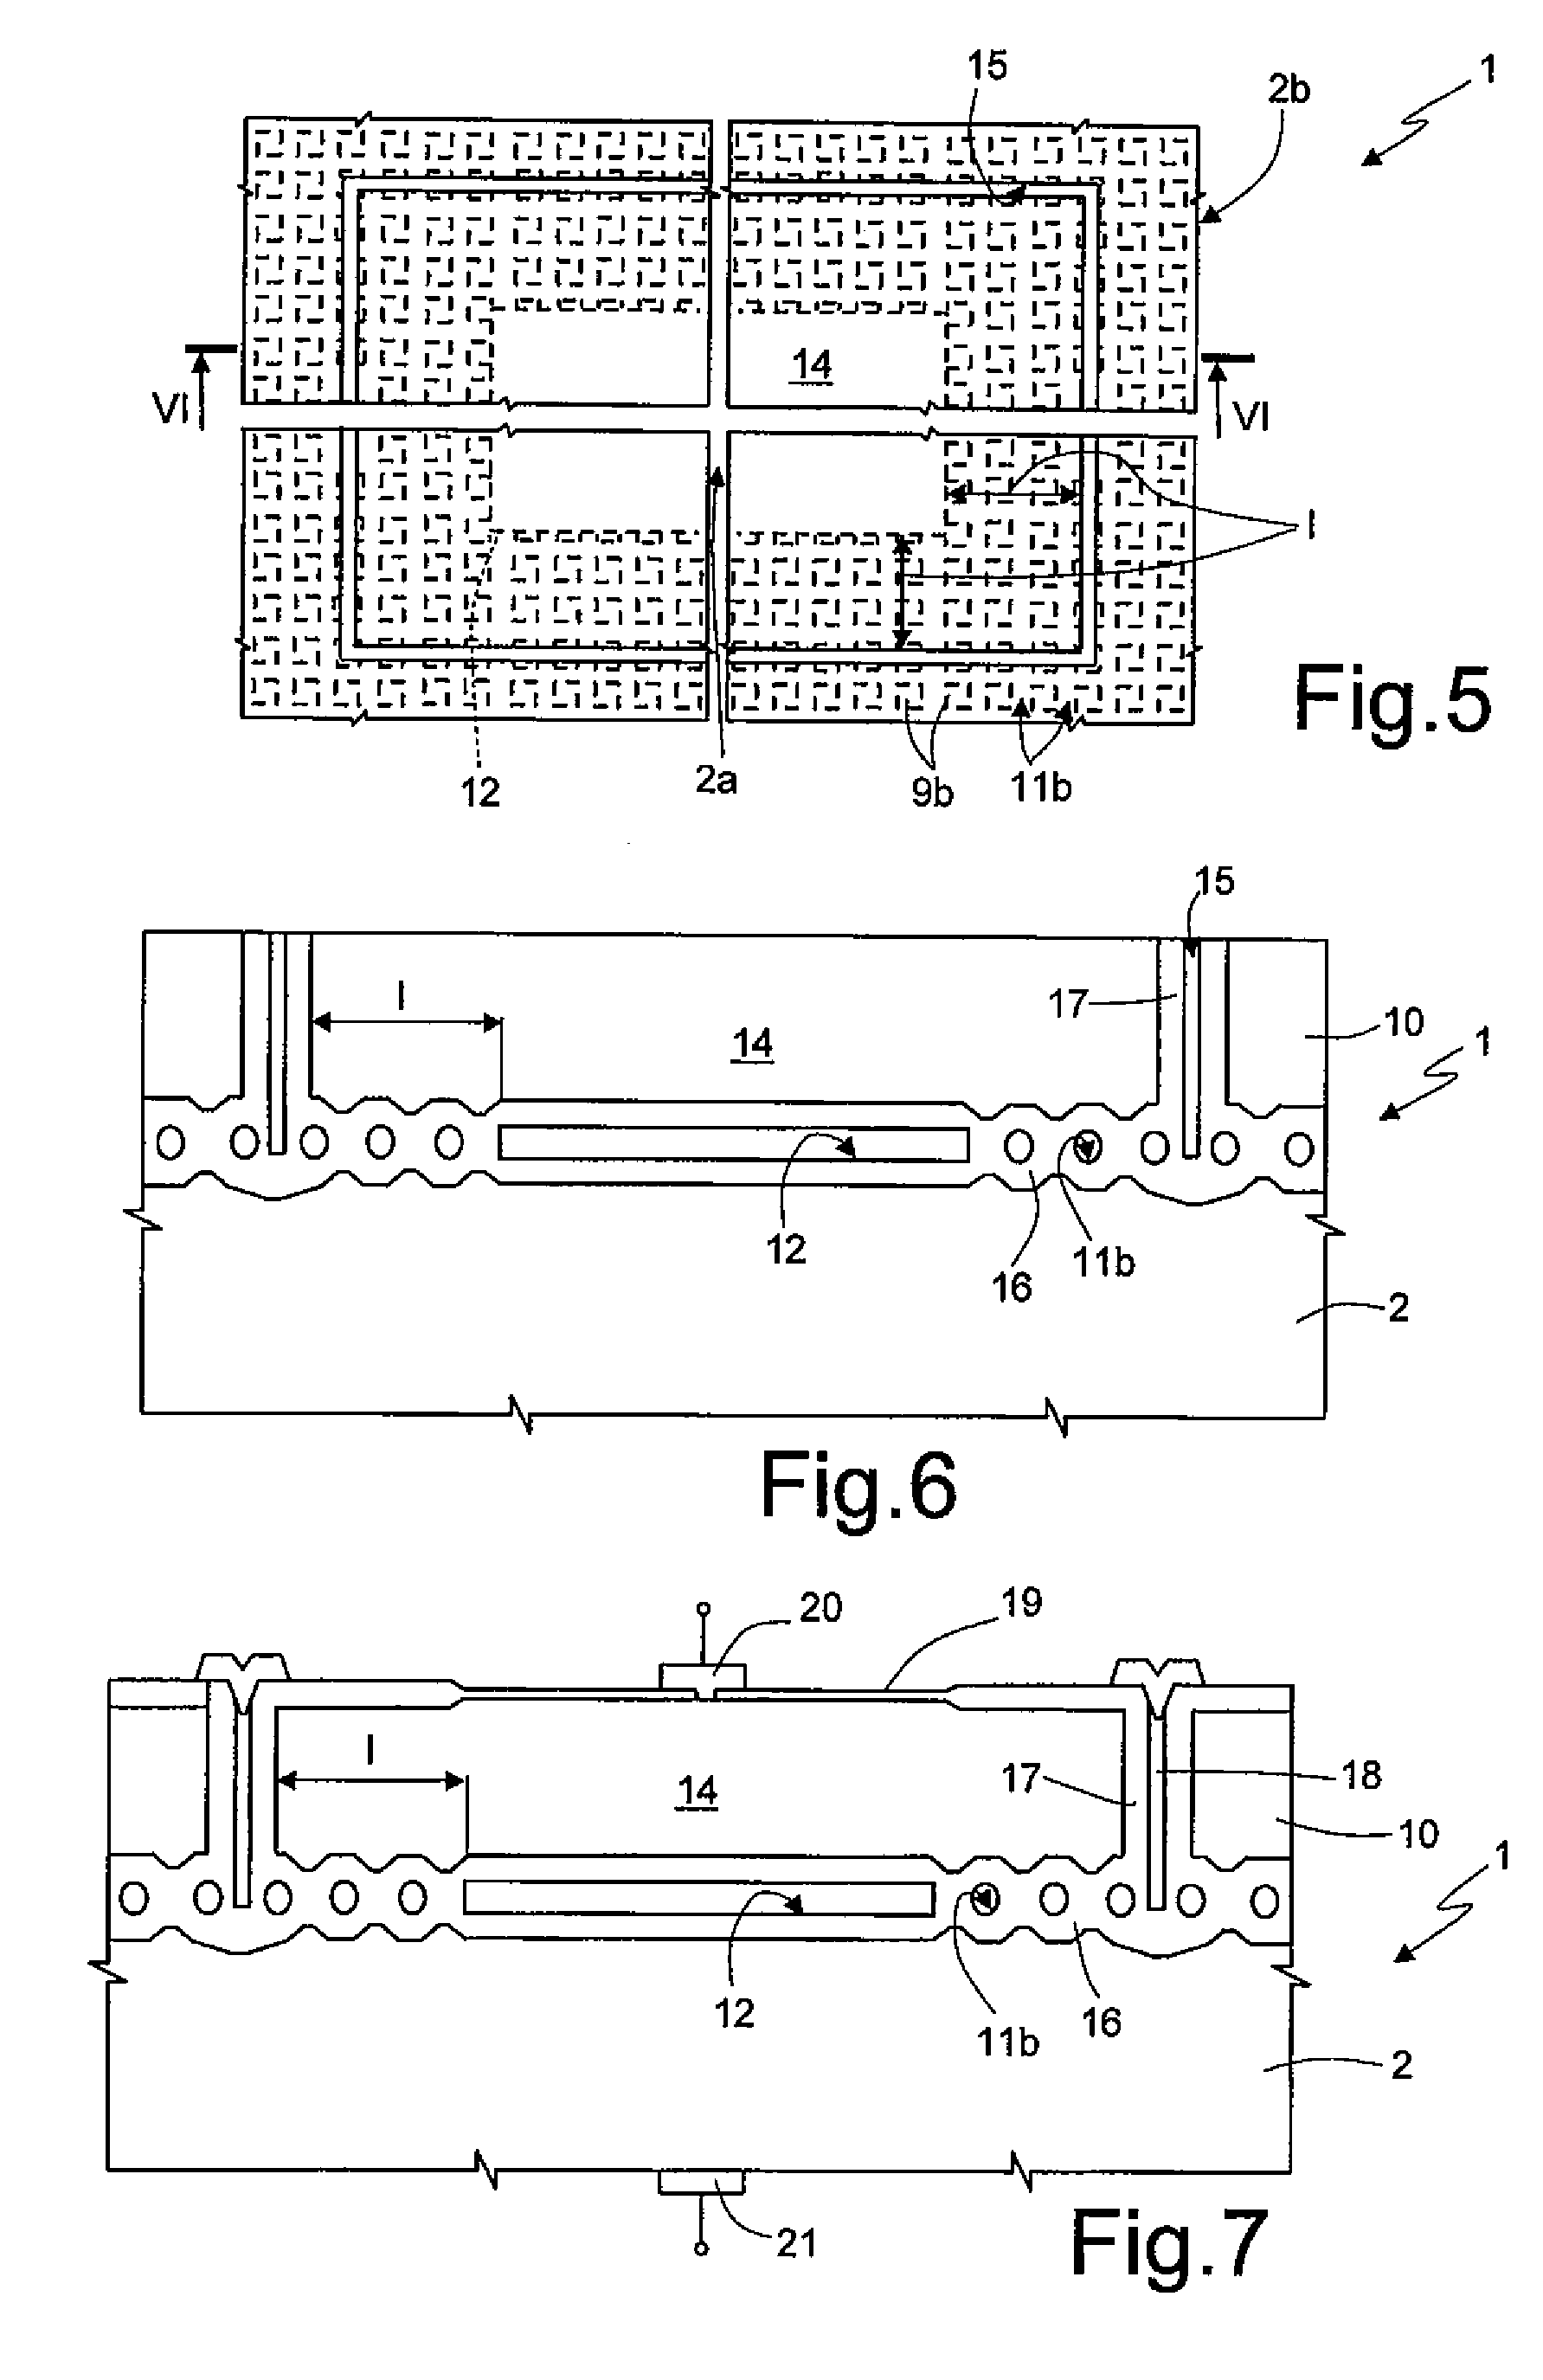 Process for manufacturing a membrane of semiconductor material integrated in, and electrically insulated from, a substrate